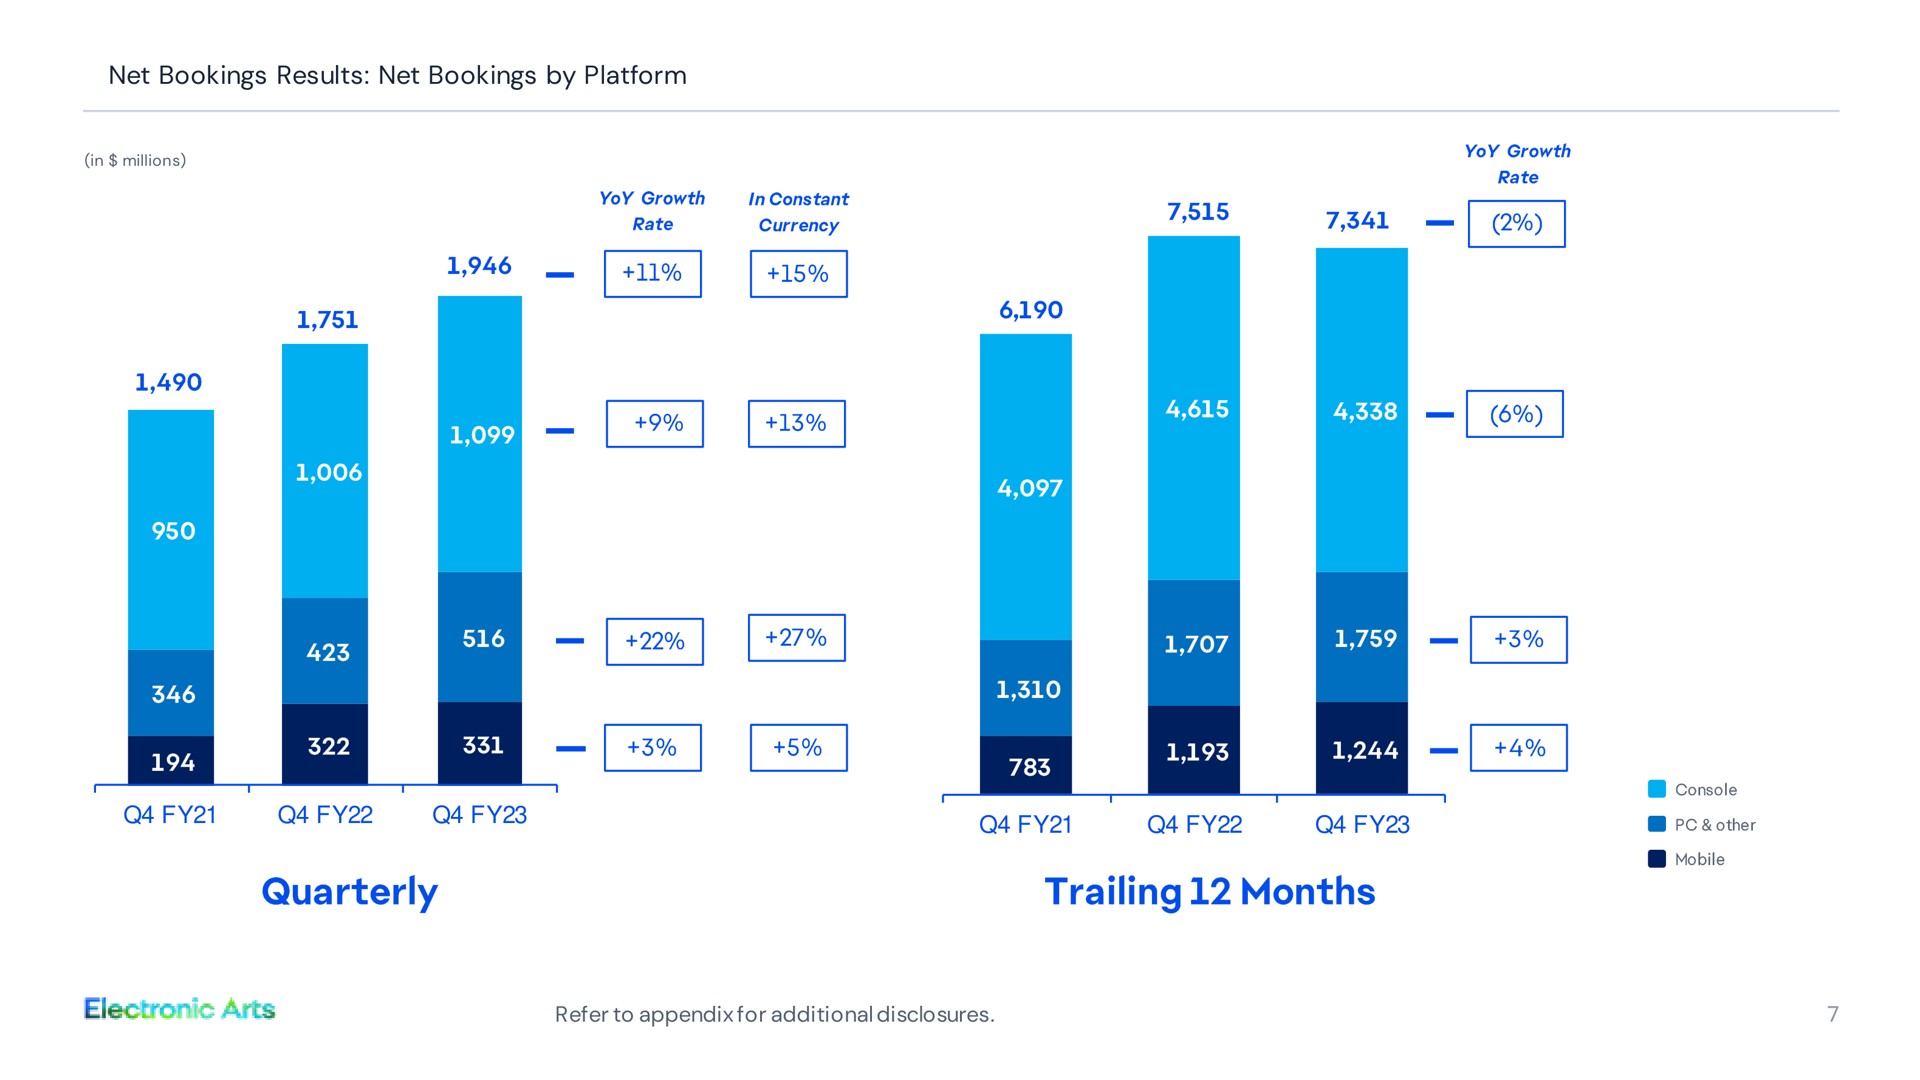 net bookings results net bookings by platform a a quarterly trailing months other electronic arts refer to appendix for additional disclosures | Electronic Arts